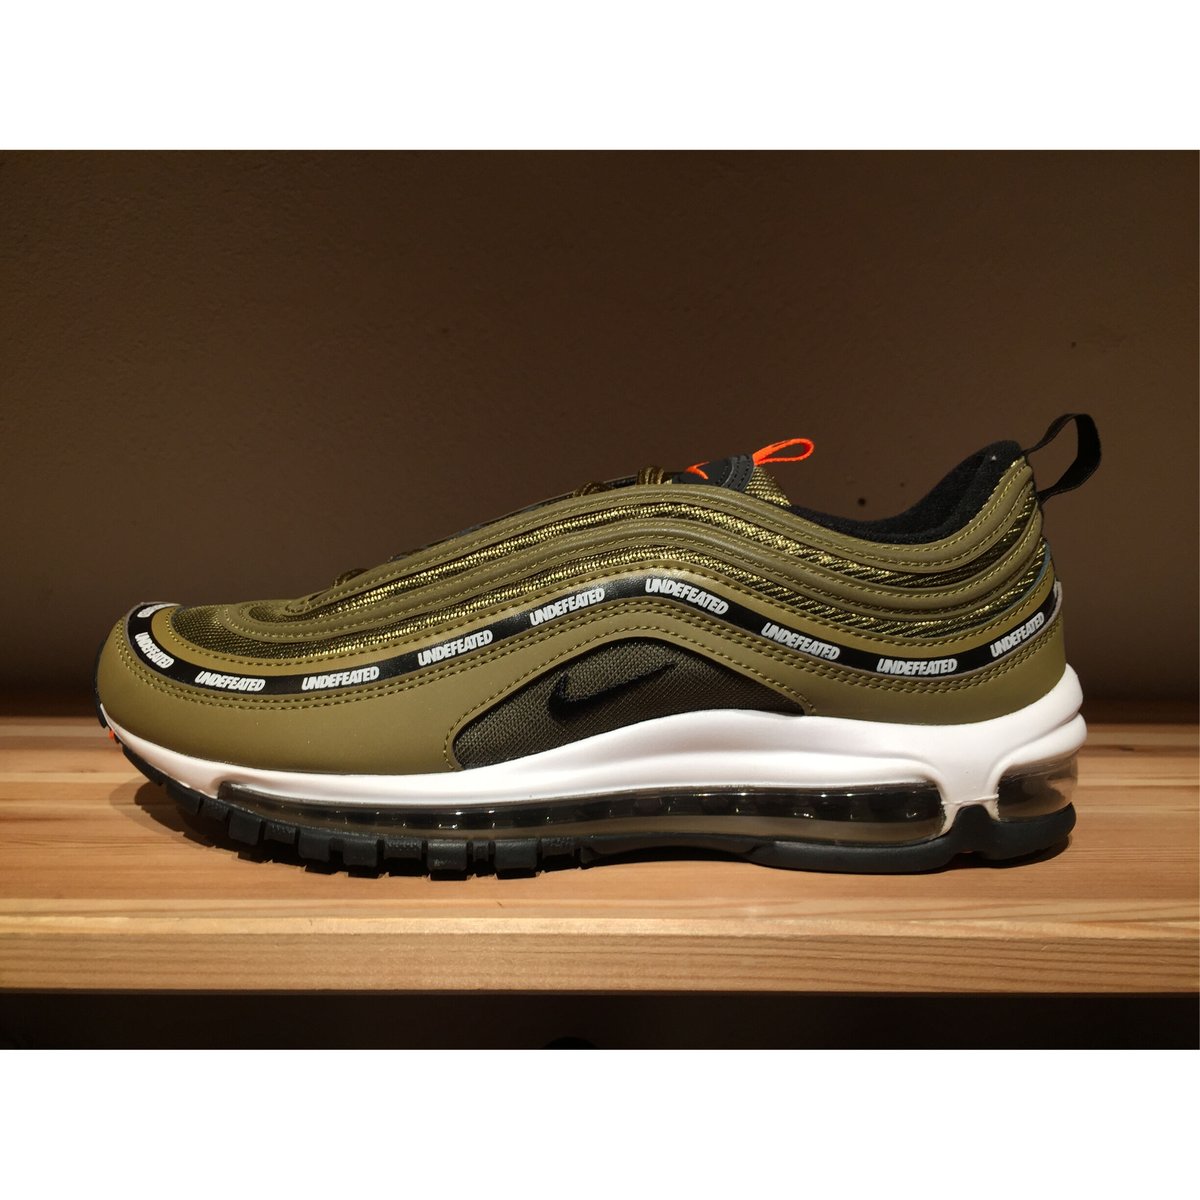 UNDEFEATED NIKE AIR MAX 97 26.5cm